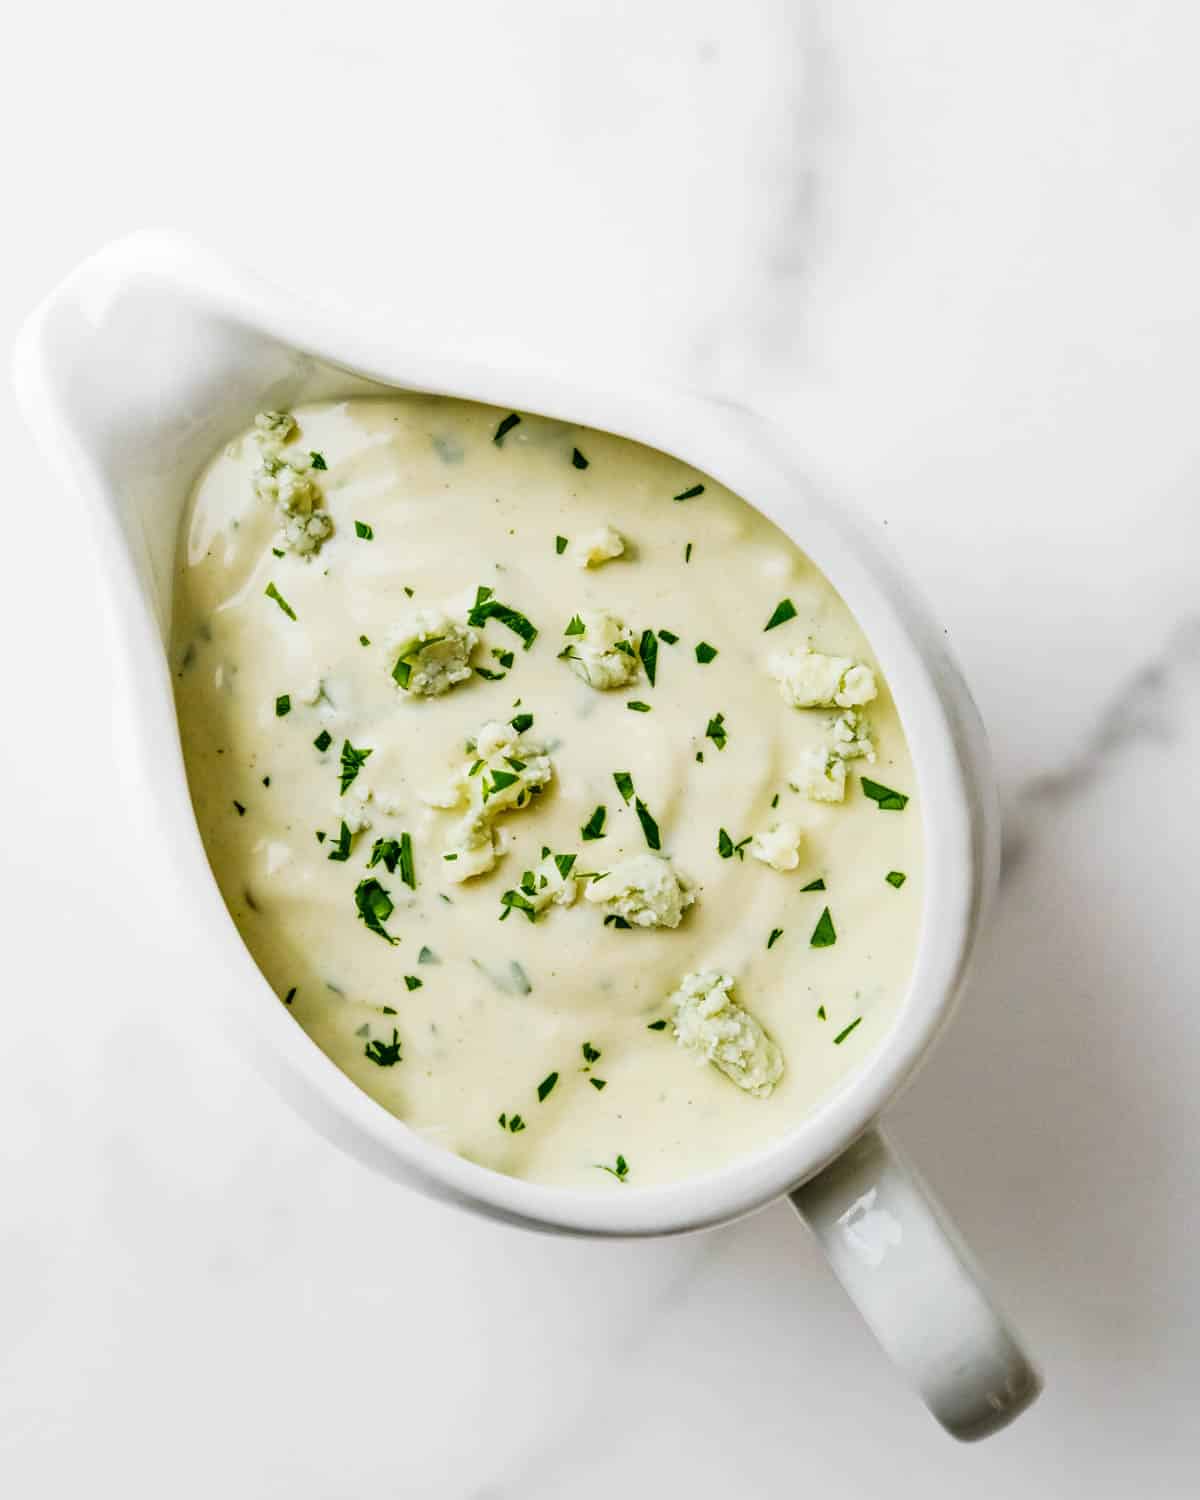 A pitcher of homemade blue cheese dressing.